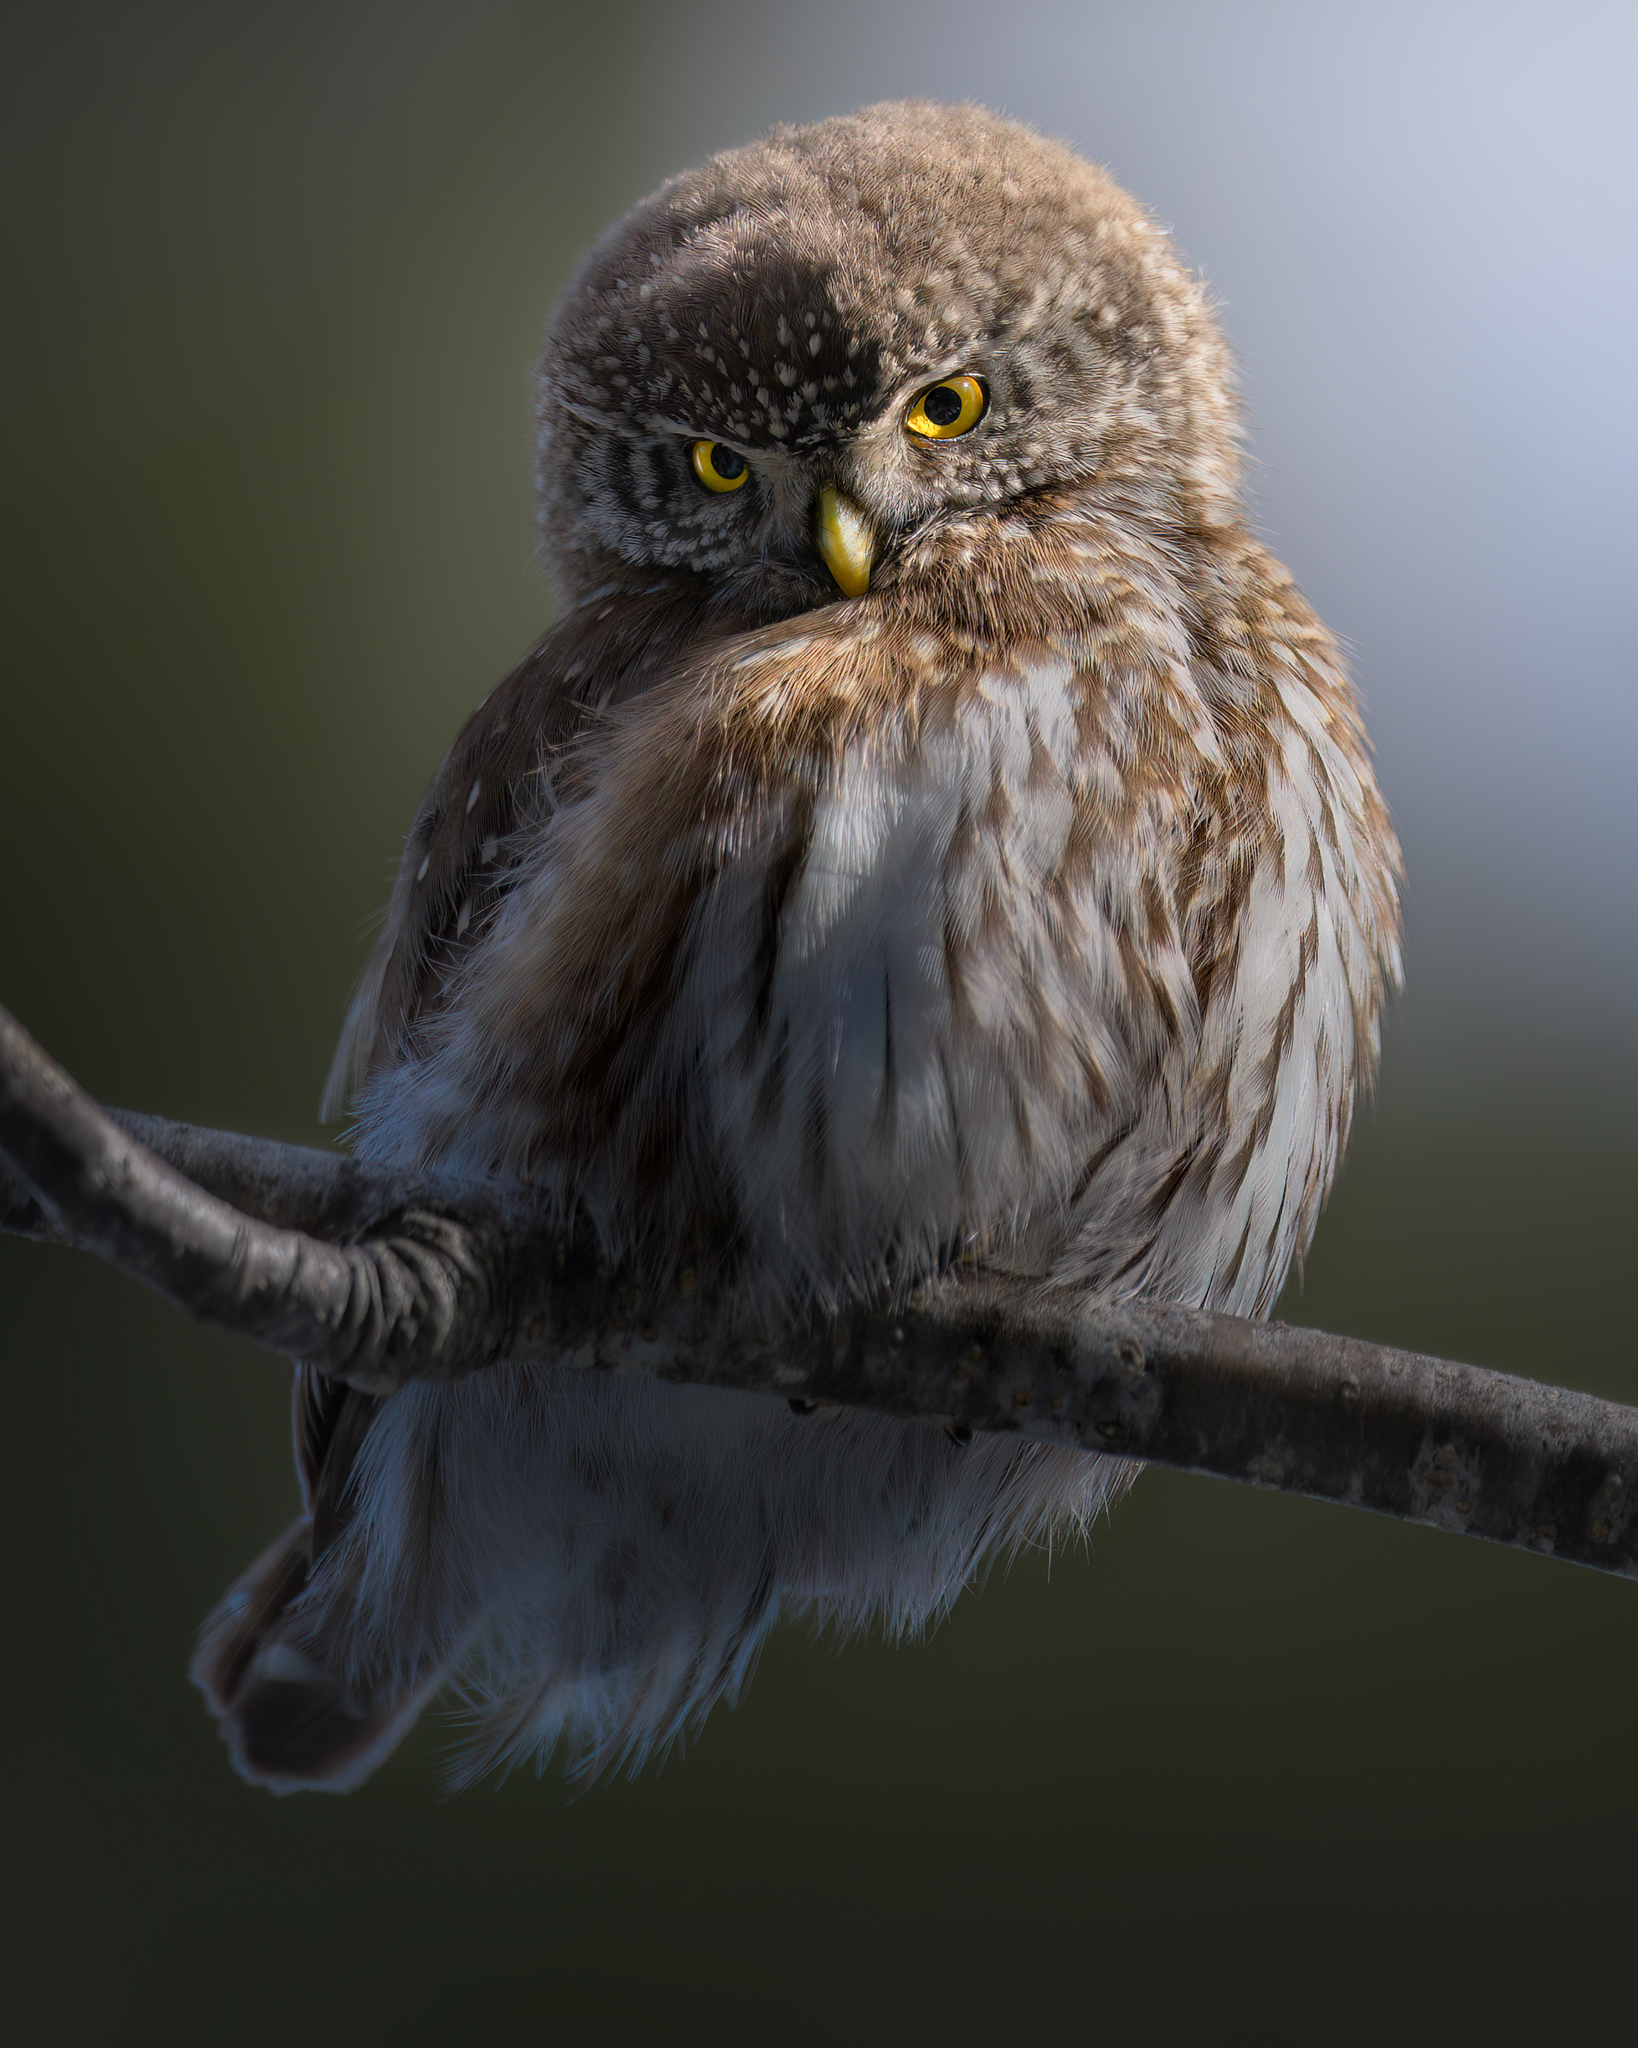 Searching through the trees, dwarf owl...